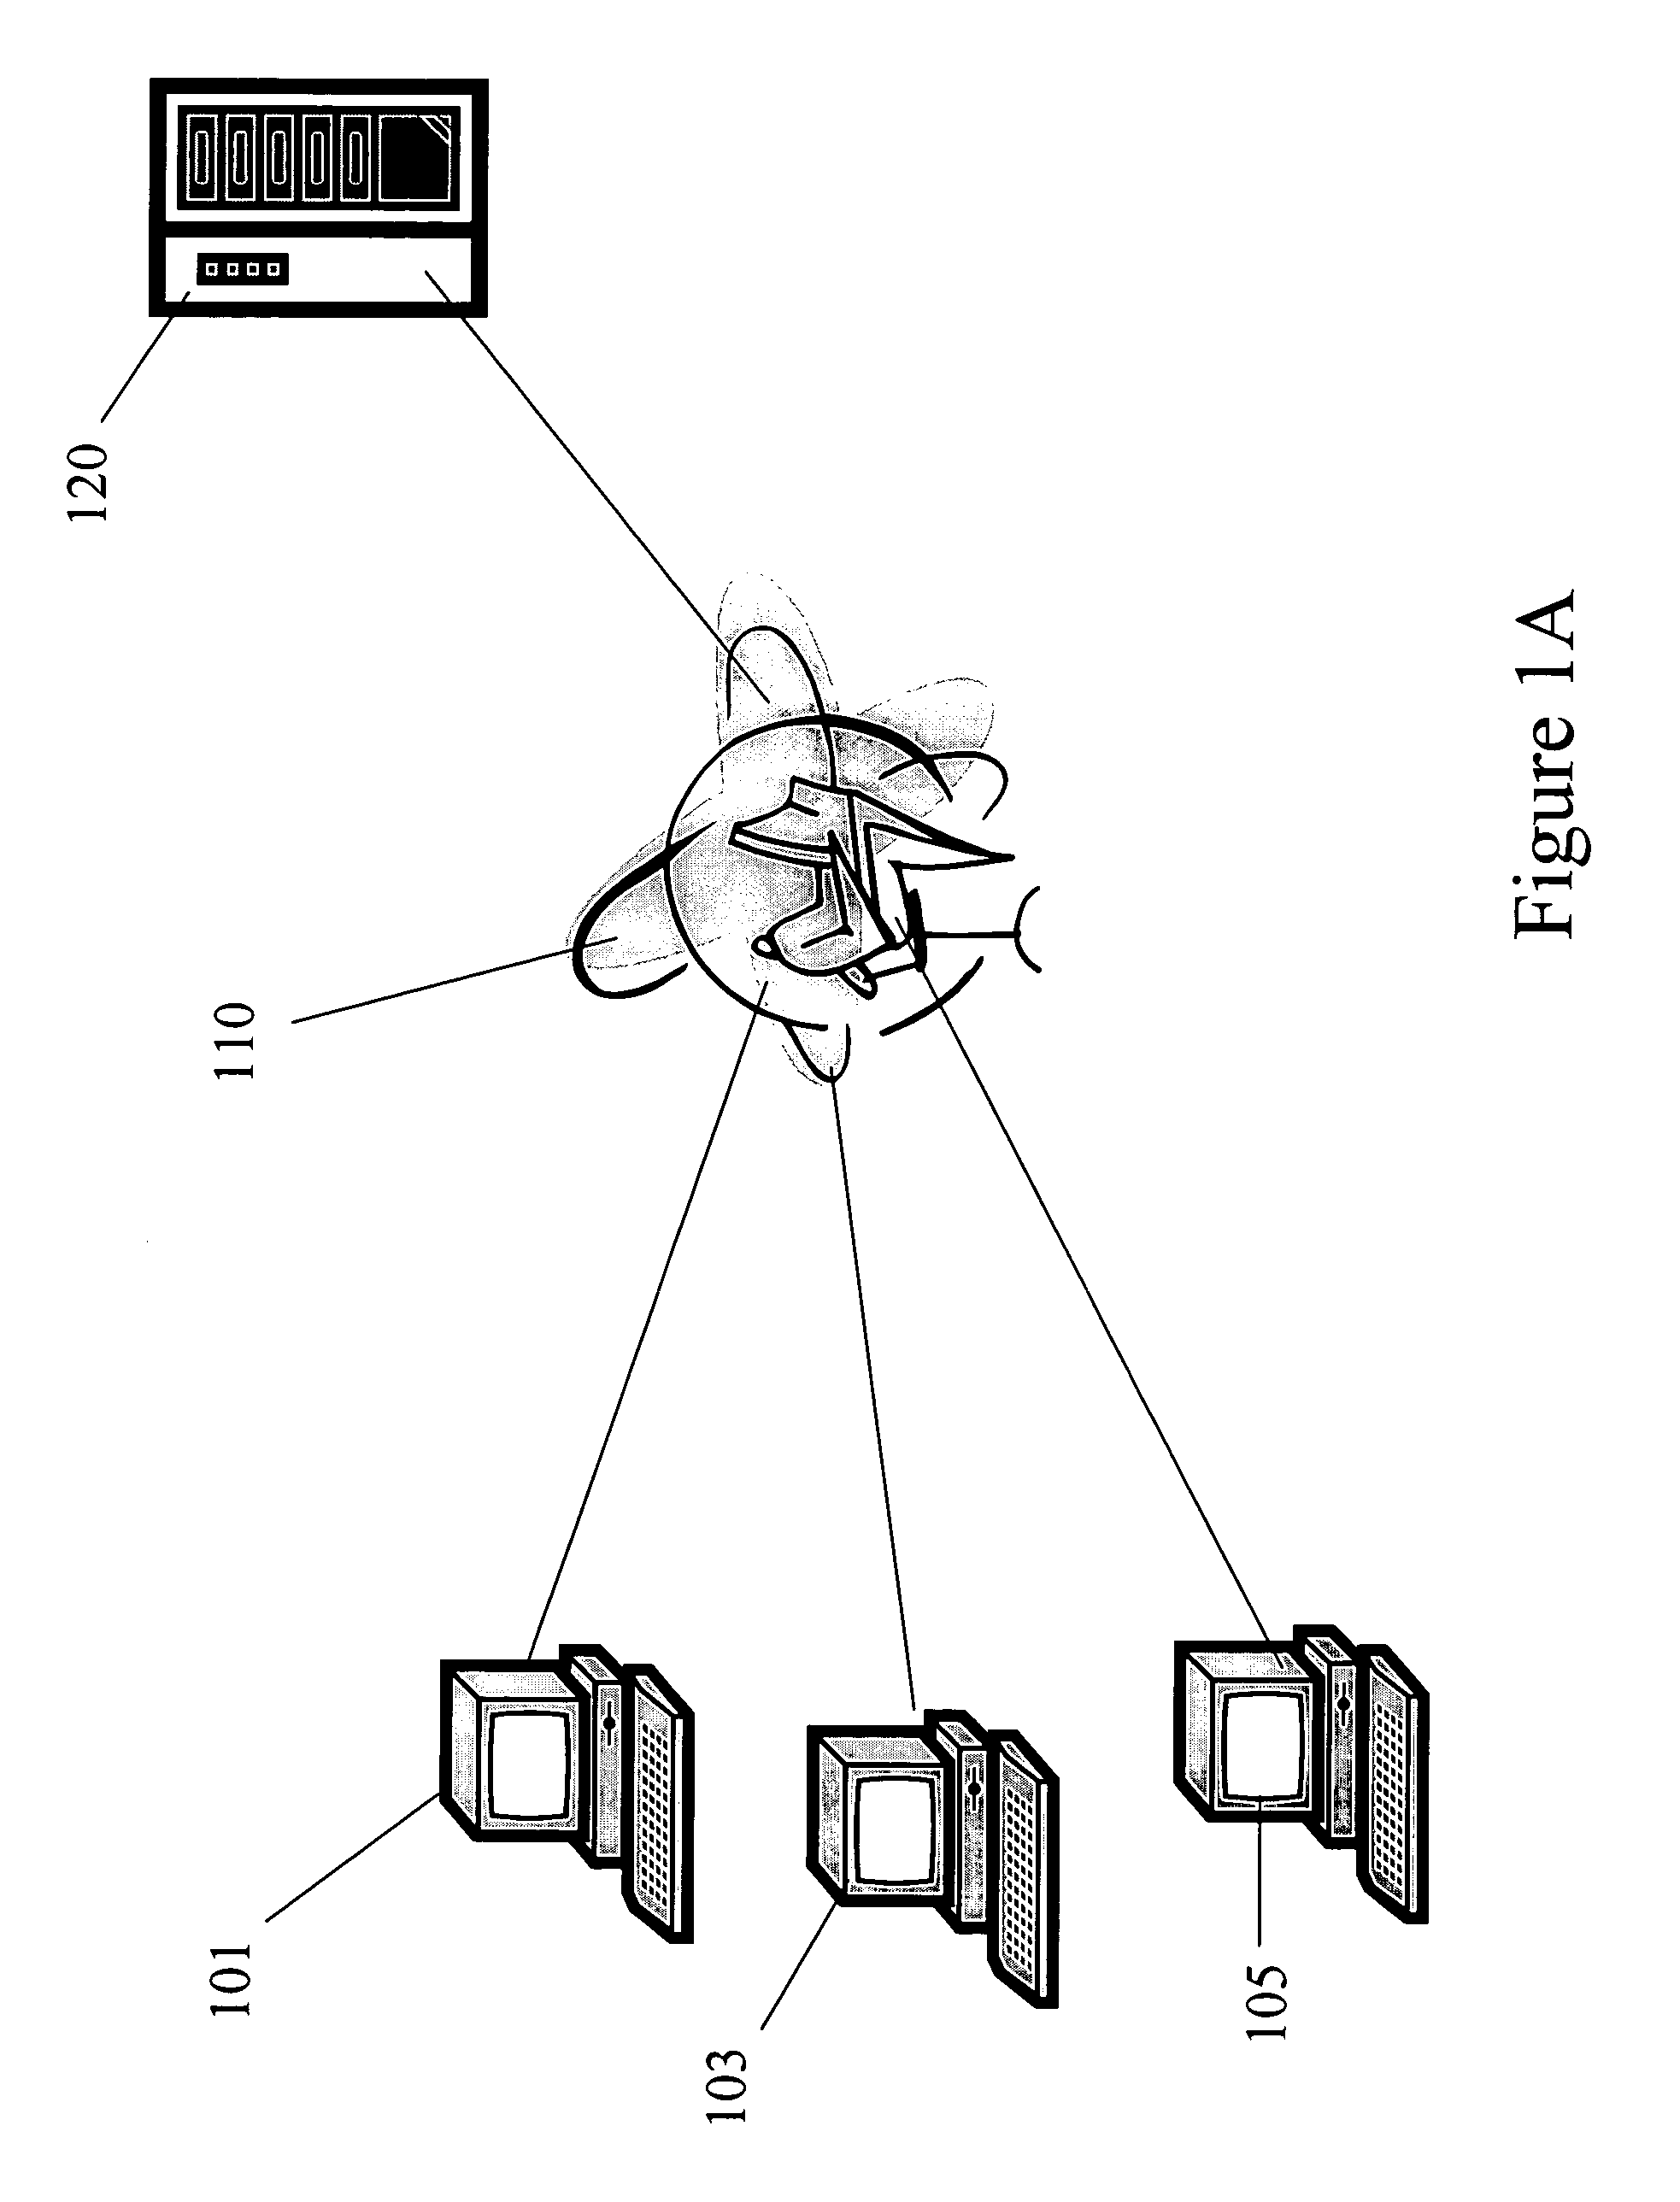 Systems and methods for providing software updates